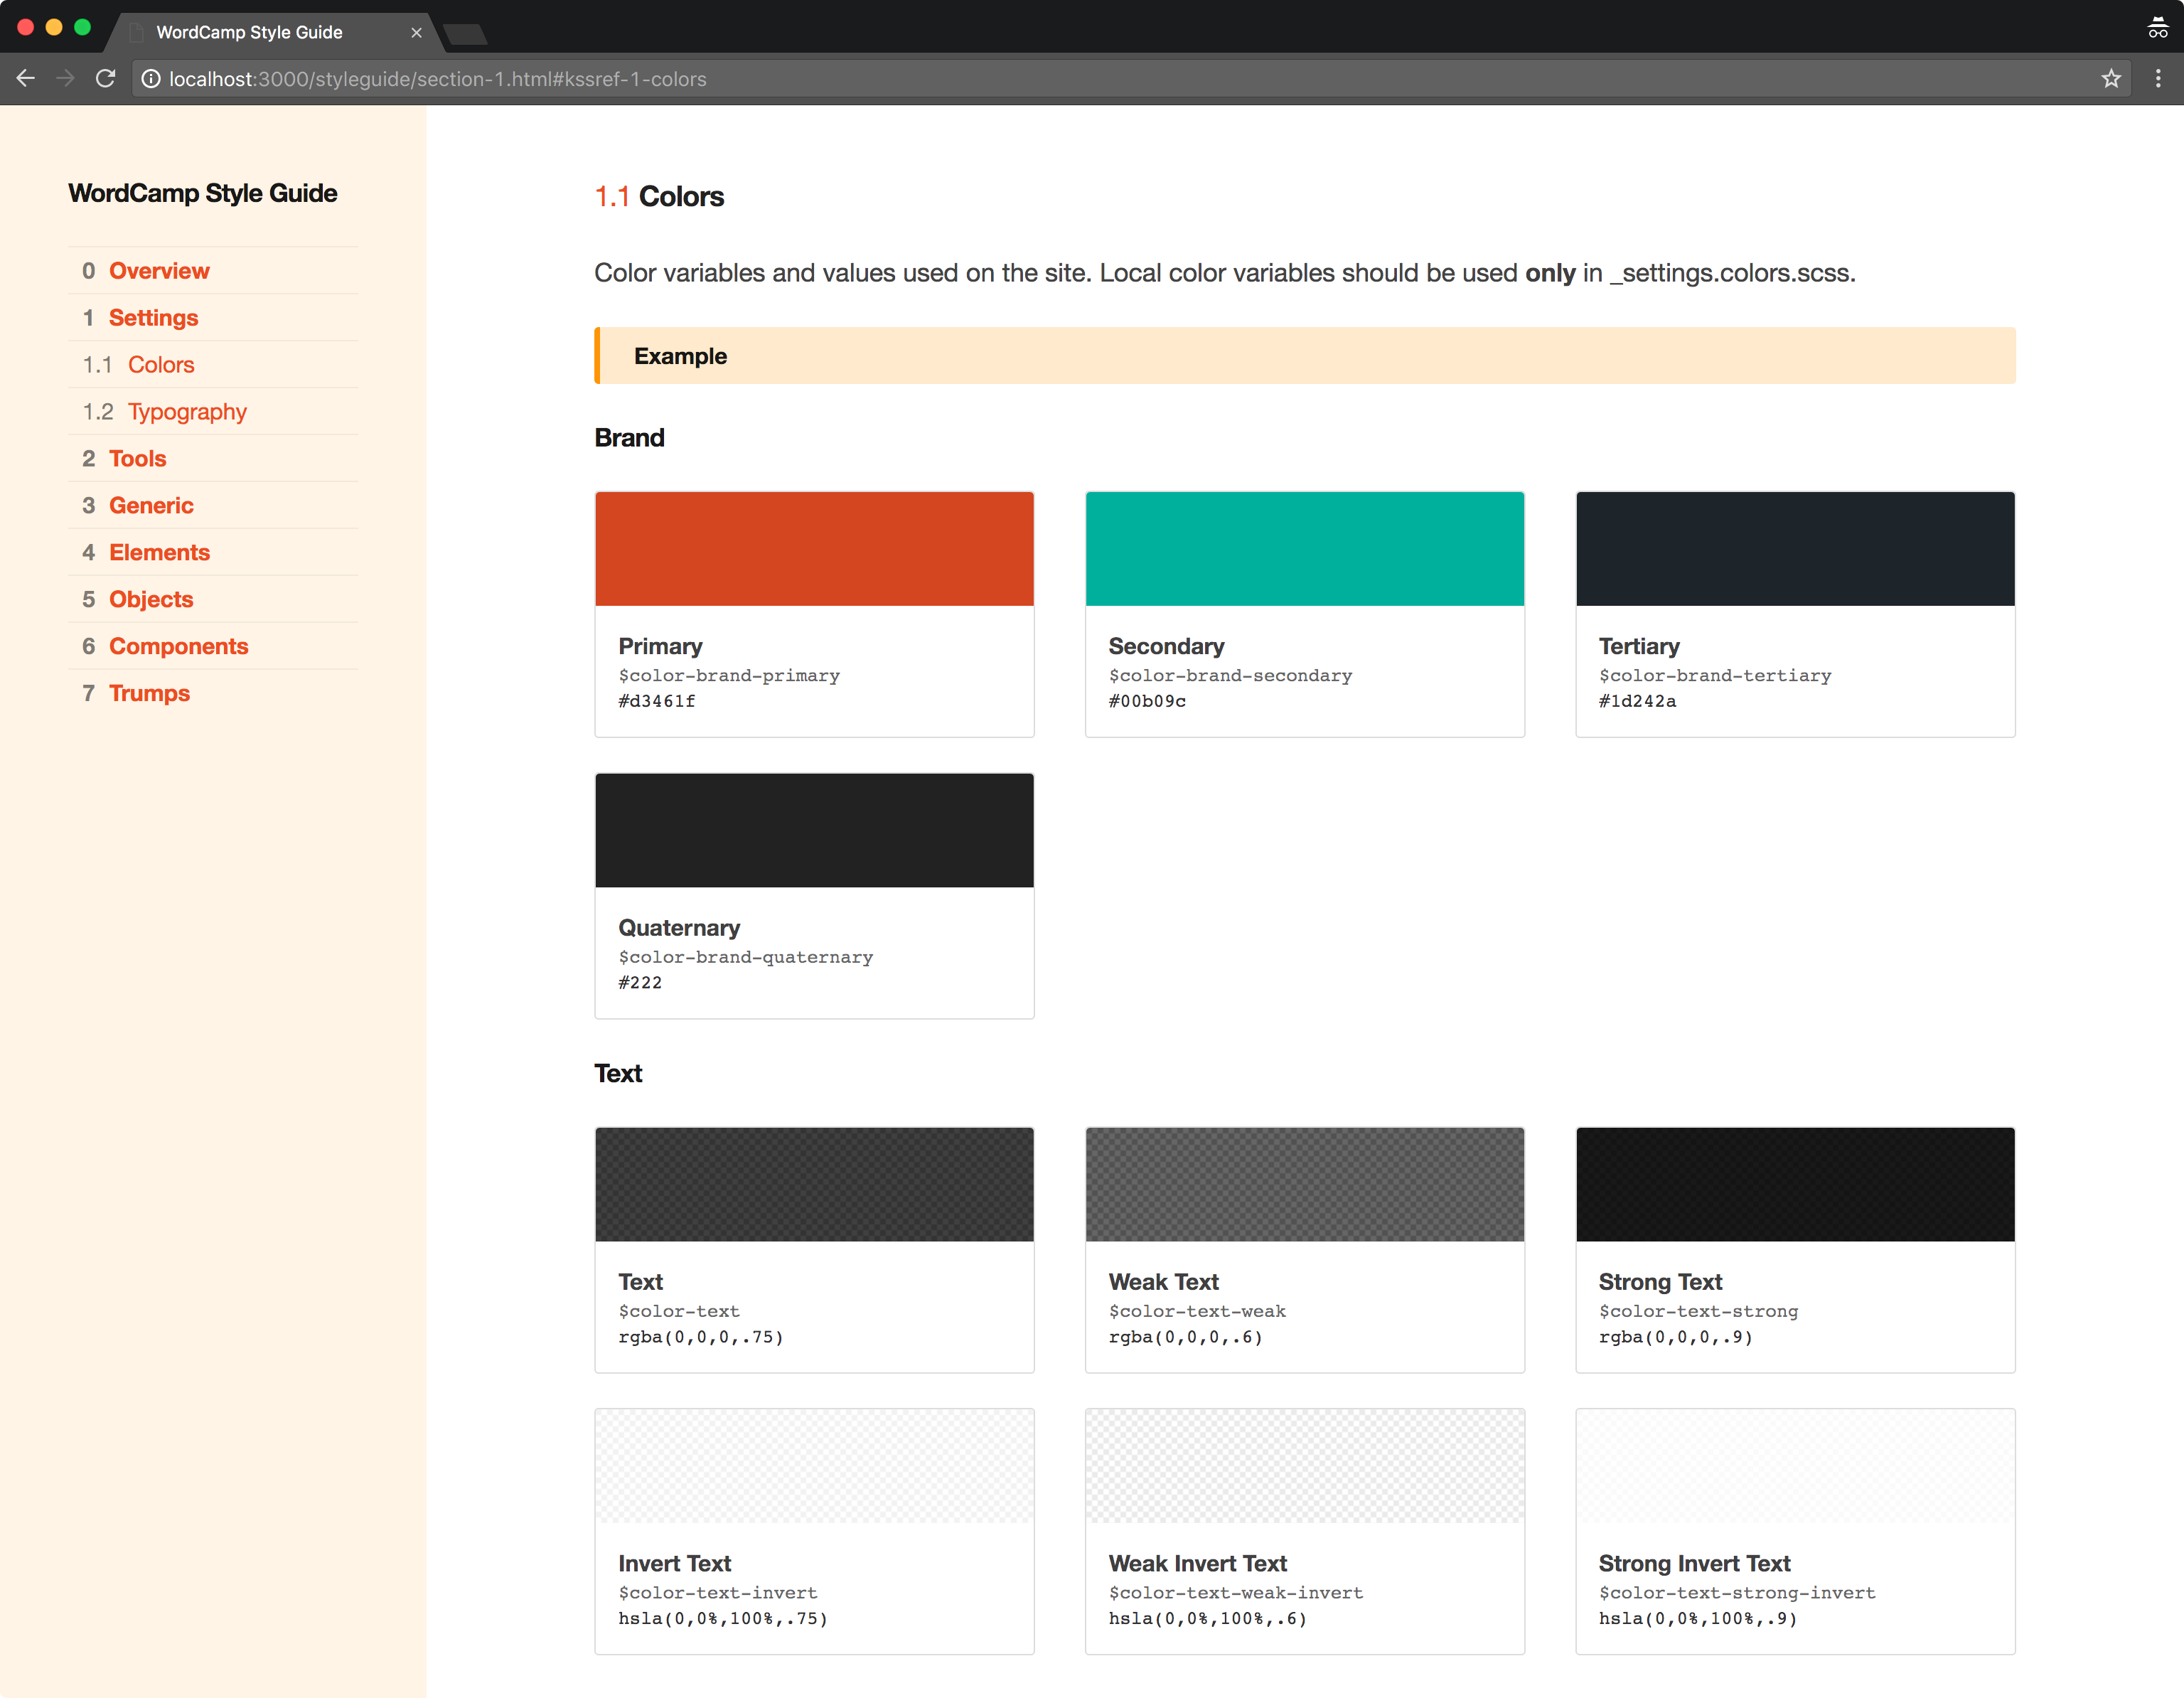 Style guide created with KSS methodology: Color panel